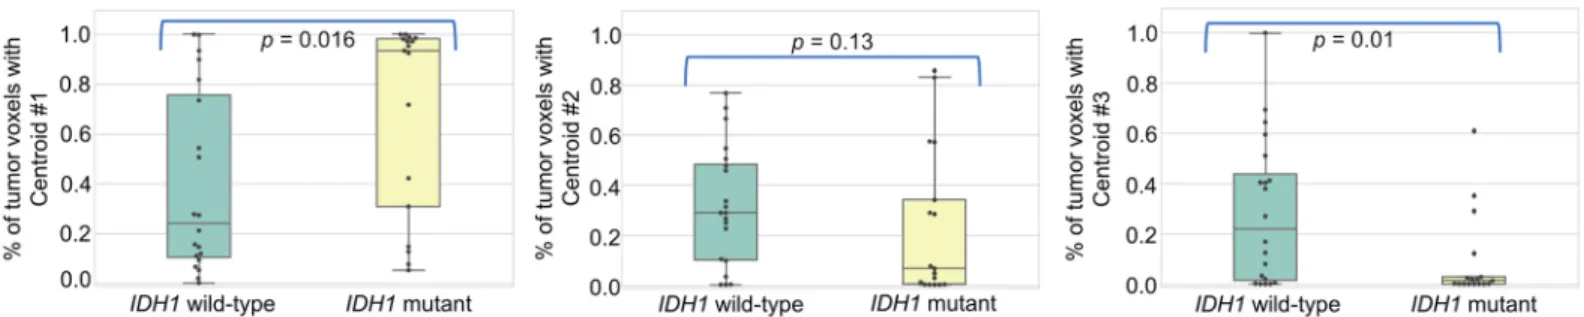 Fig 4. Association with IDH1 mutation status. Boxplots with percentage of tumor voxels with centroids #1, #2 and #3 (from left to right) according to the IDH1 mutation status.